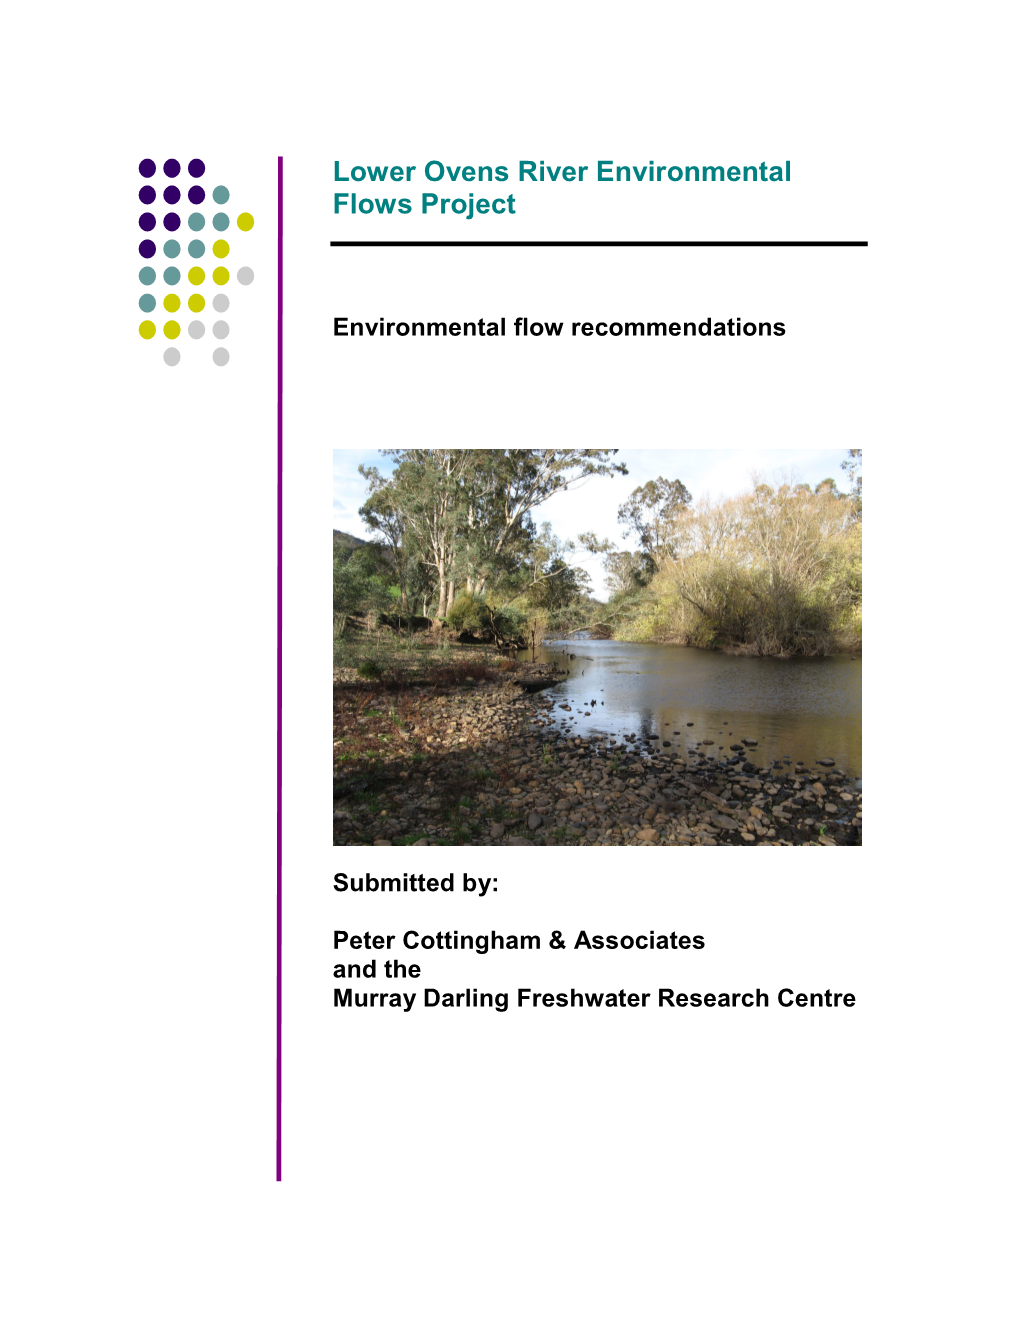 Lower Ovens River Environmental Flows Project